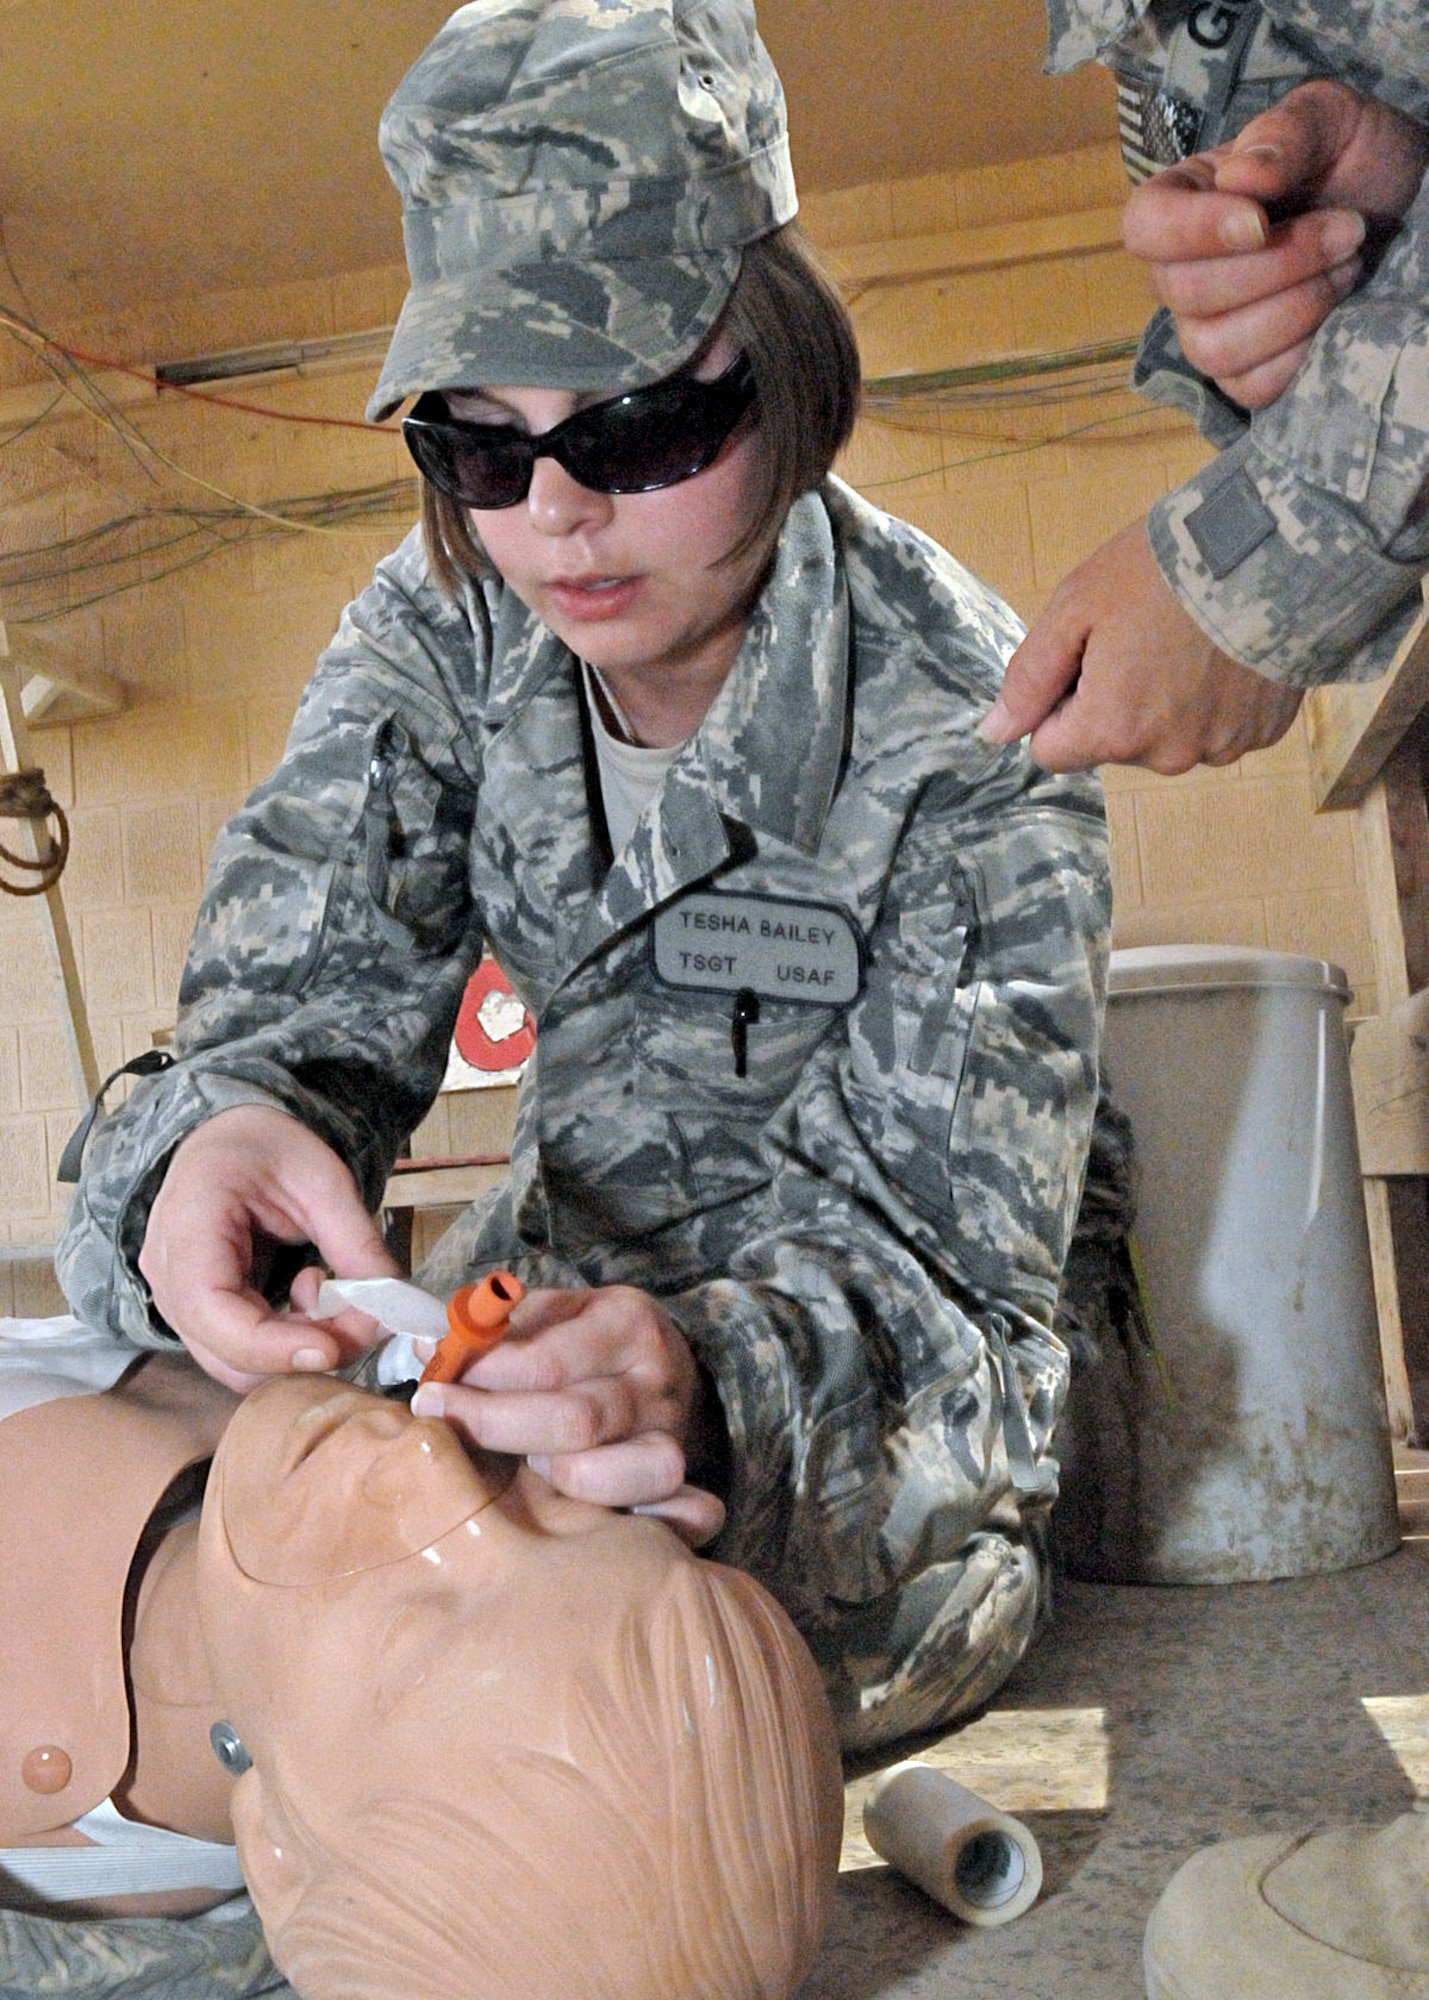 Tech. Sgt. Tesha Bailey inserts a nasopharyngeal airway into a medical mannequin to clear an obstructed airway during a tactical field care exercise, July 7, 2011, at Contingency Operating Site Marez, Iraq. Bailey, a financial management specialist assigned to the Air Force Financial Management Detachment there, attended the combat lifesaver refresher course conducted by Army combat medics assigned to Company C, 27th Brigade Support Battalion. (U.S. Army photo/Spc. Terence Ewings)